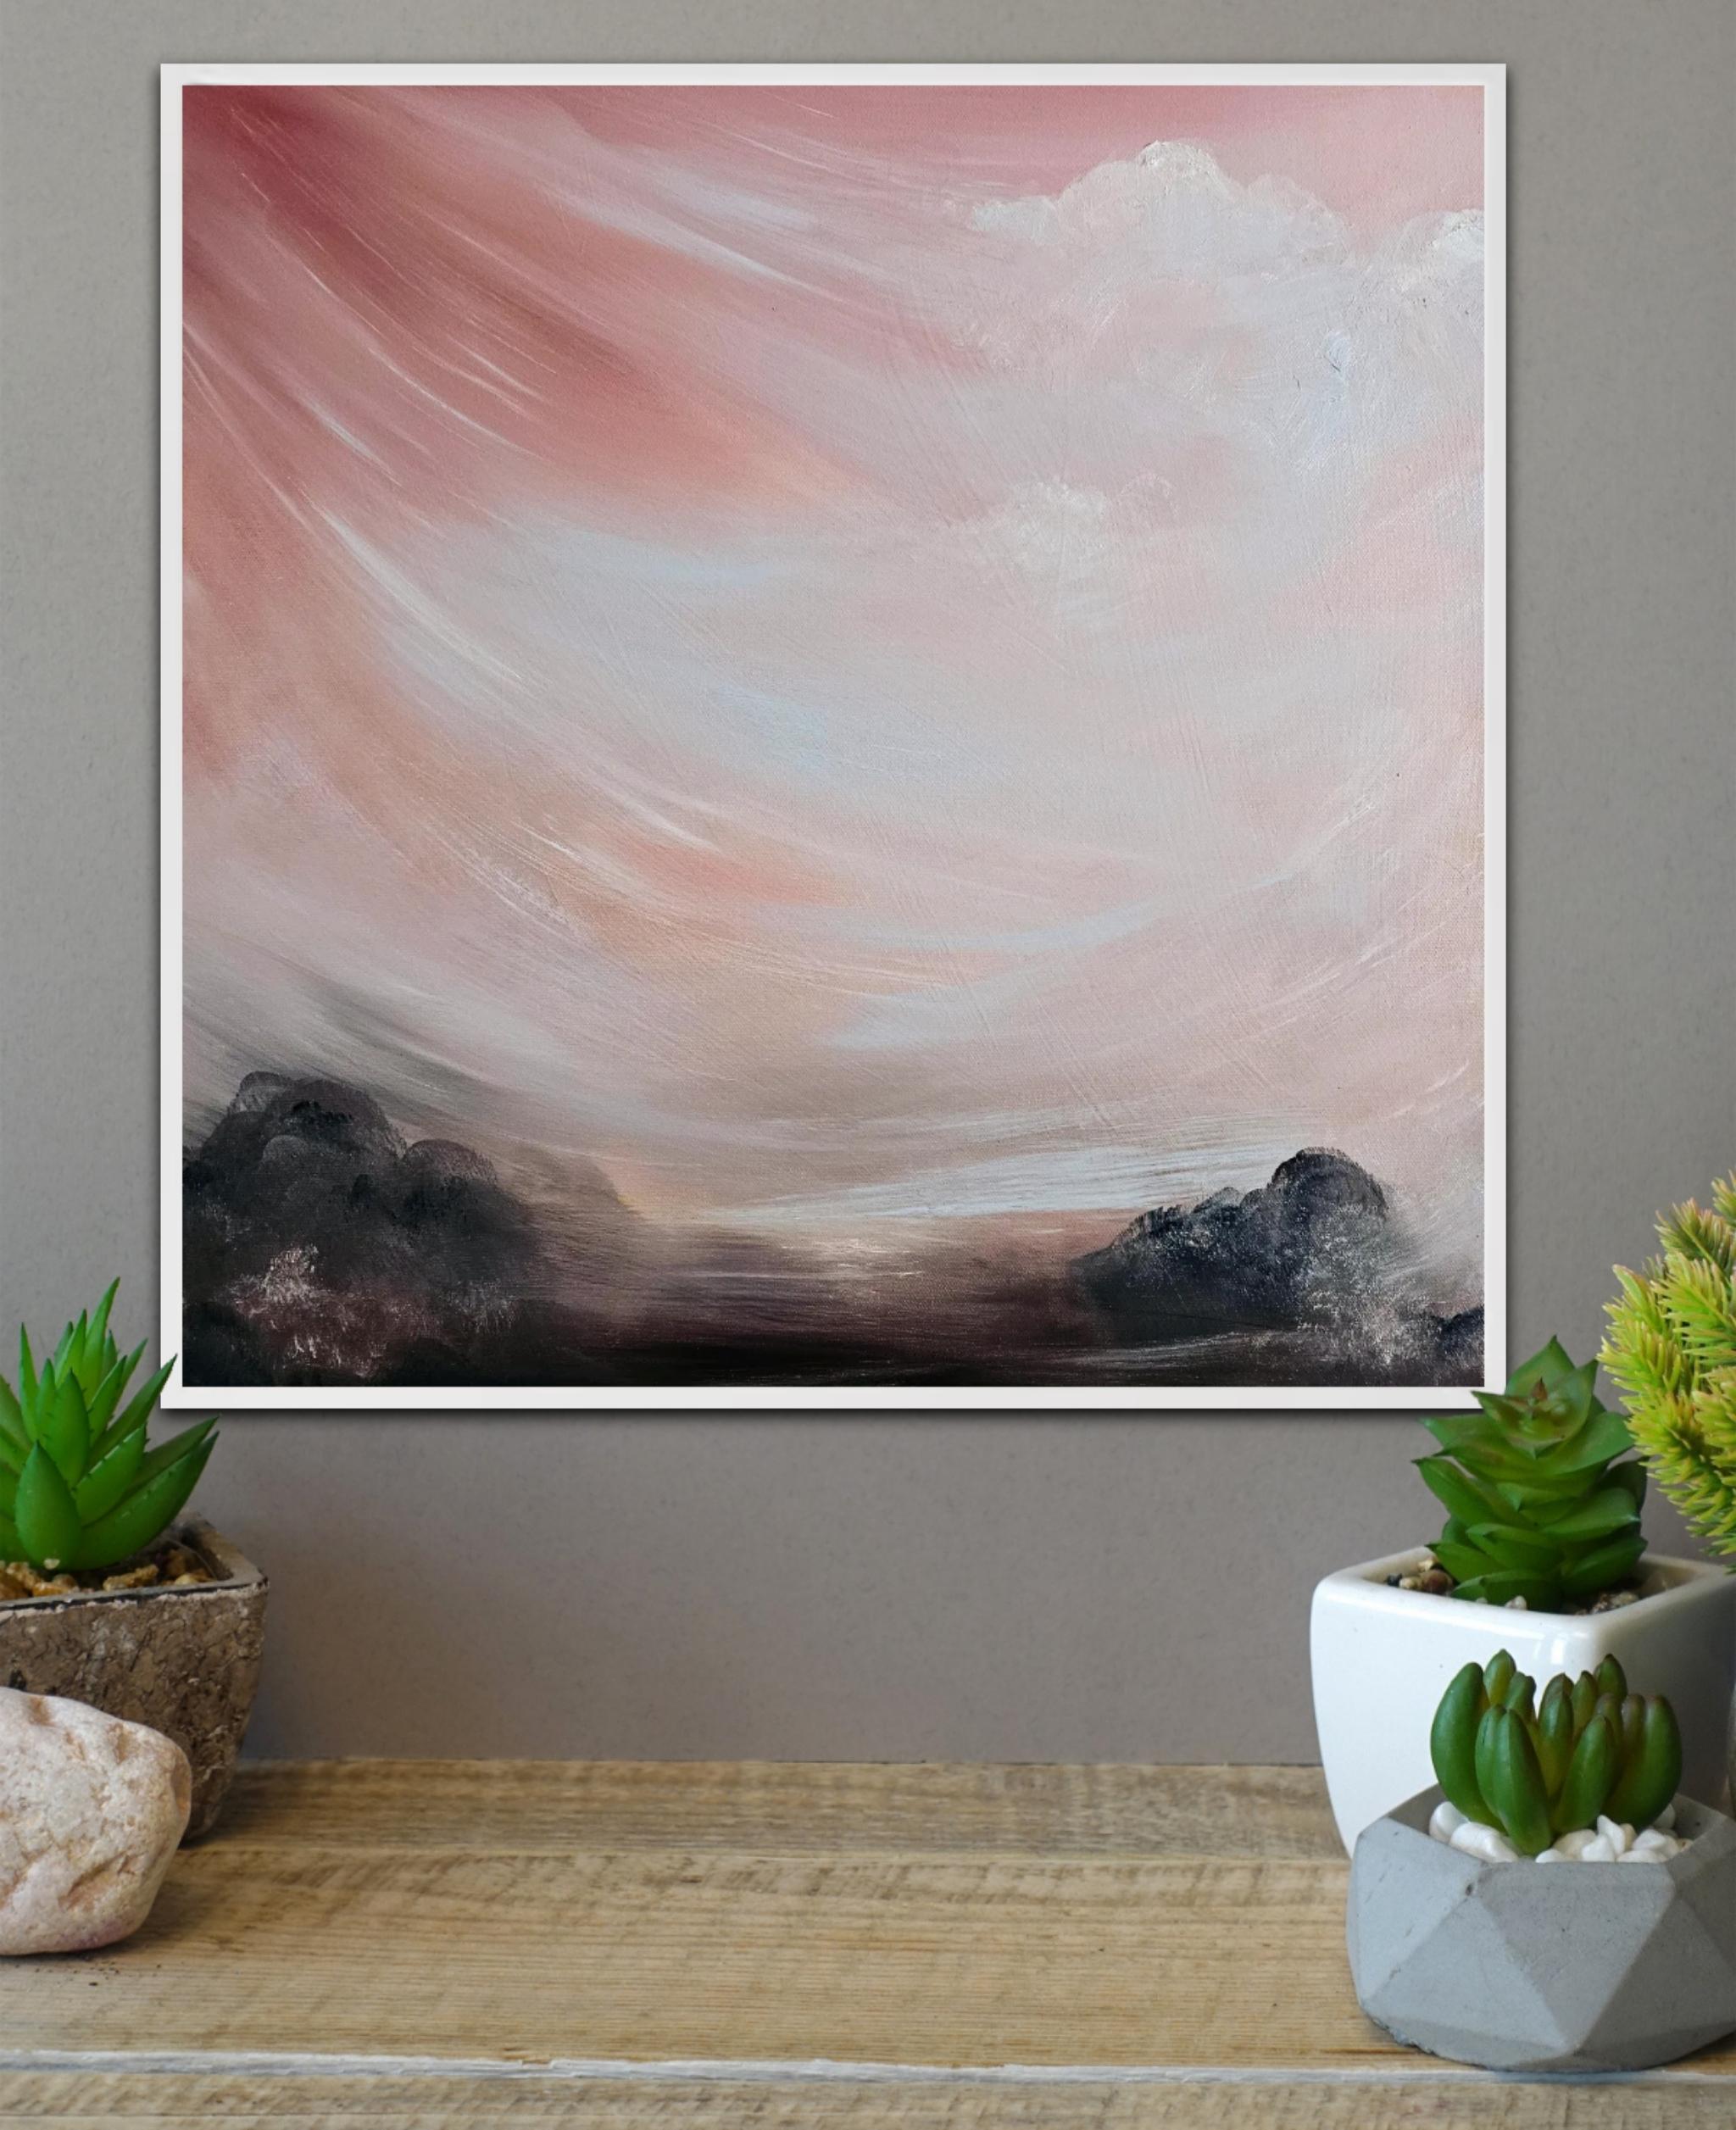 The echo of her voice across the mesa - Abstract desert sky painting For Sale 6